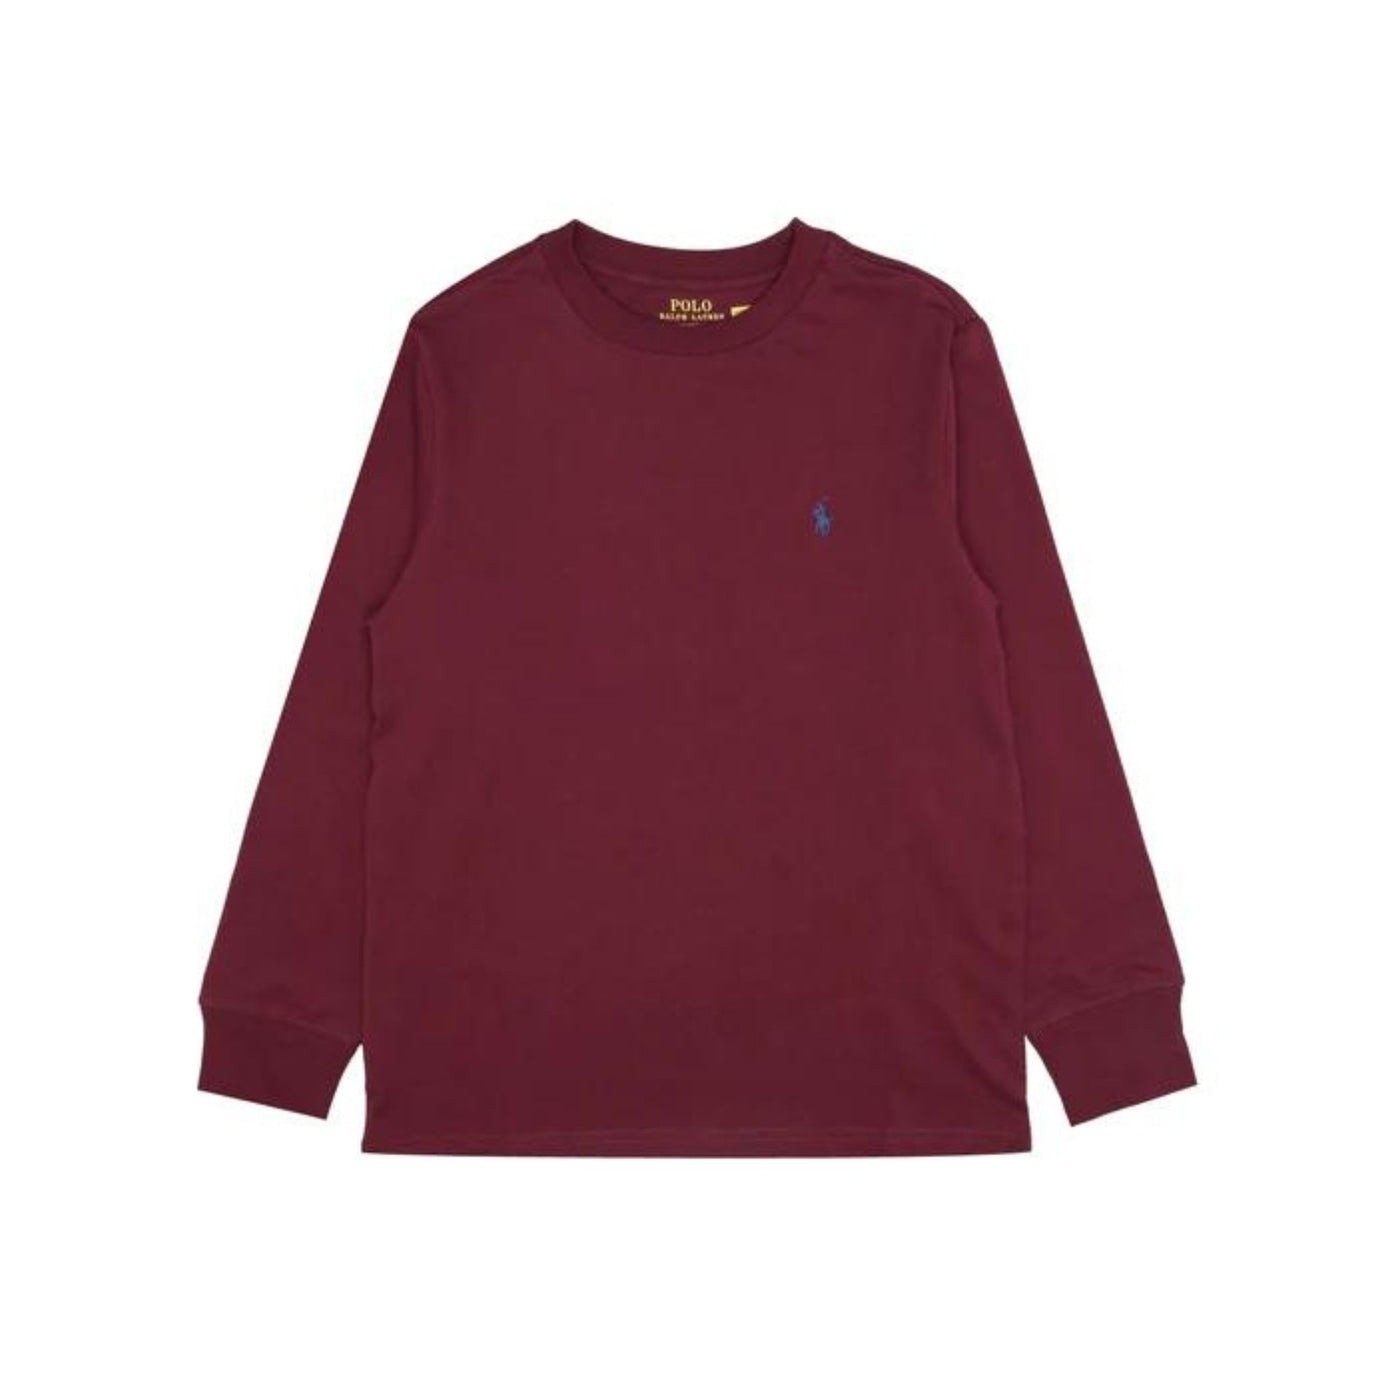 Children's long-sleeved T-shirt with embroidered logo